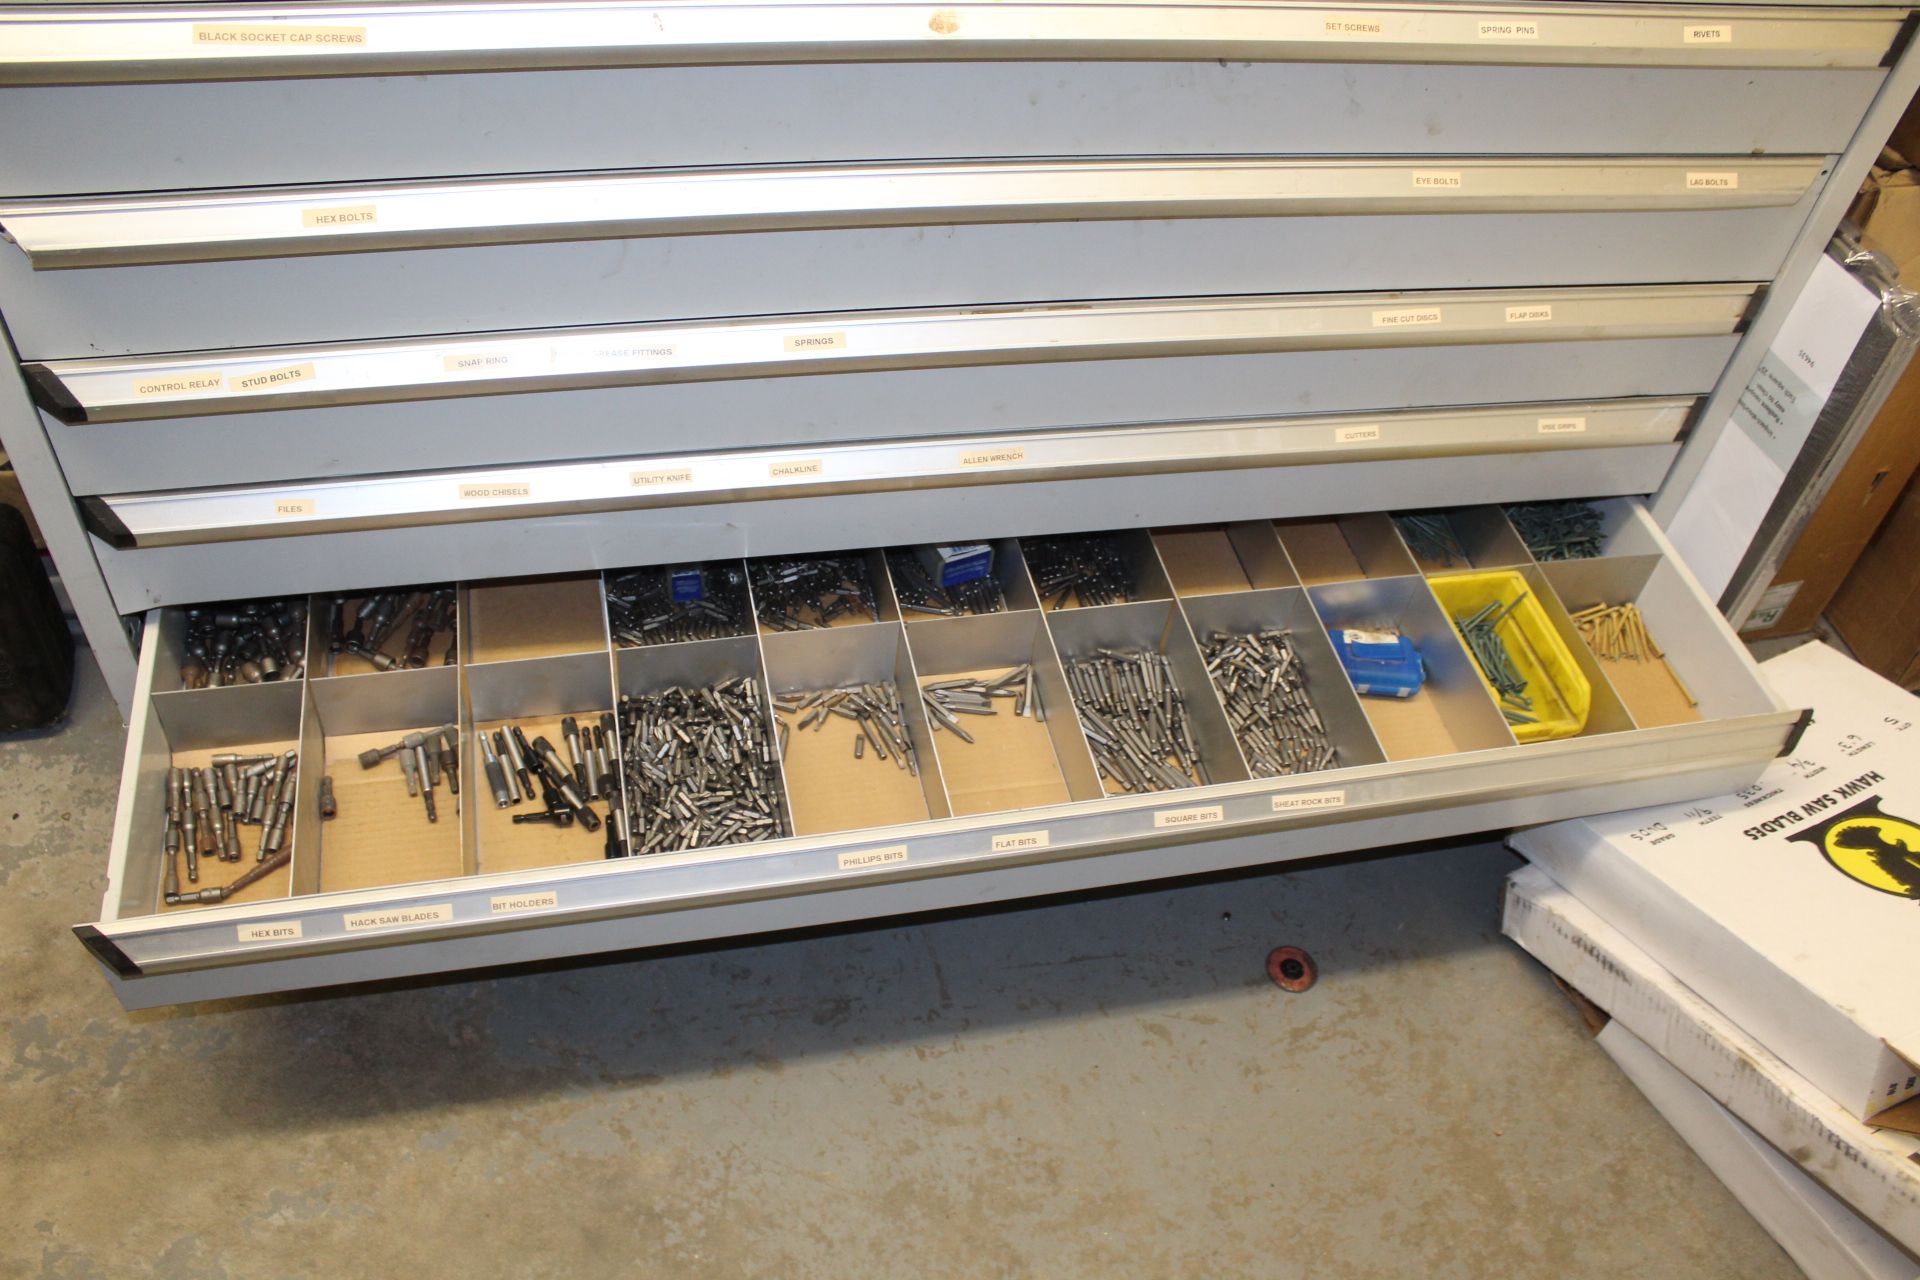 (3) Rousseau 8-Drawer Metal Cabinets on Casters, Sold with Contents As Shown - Image 23 of 23